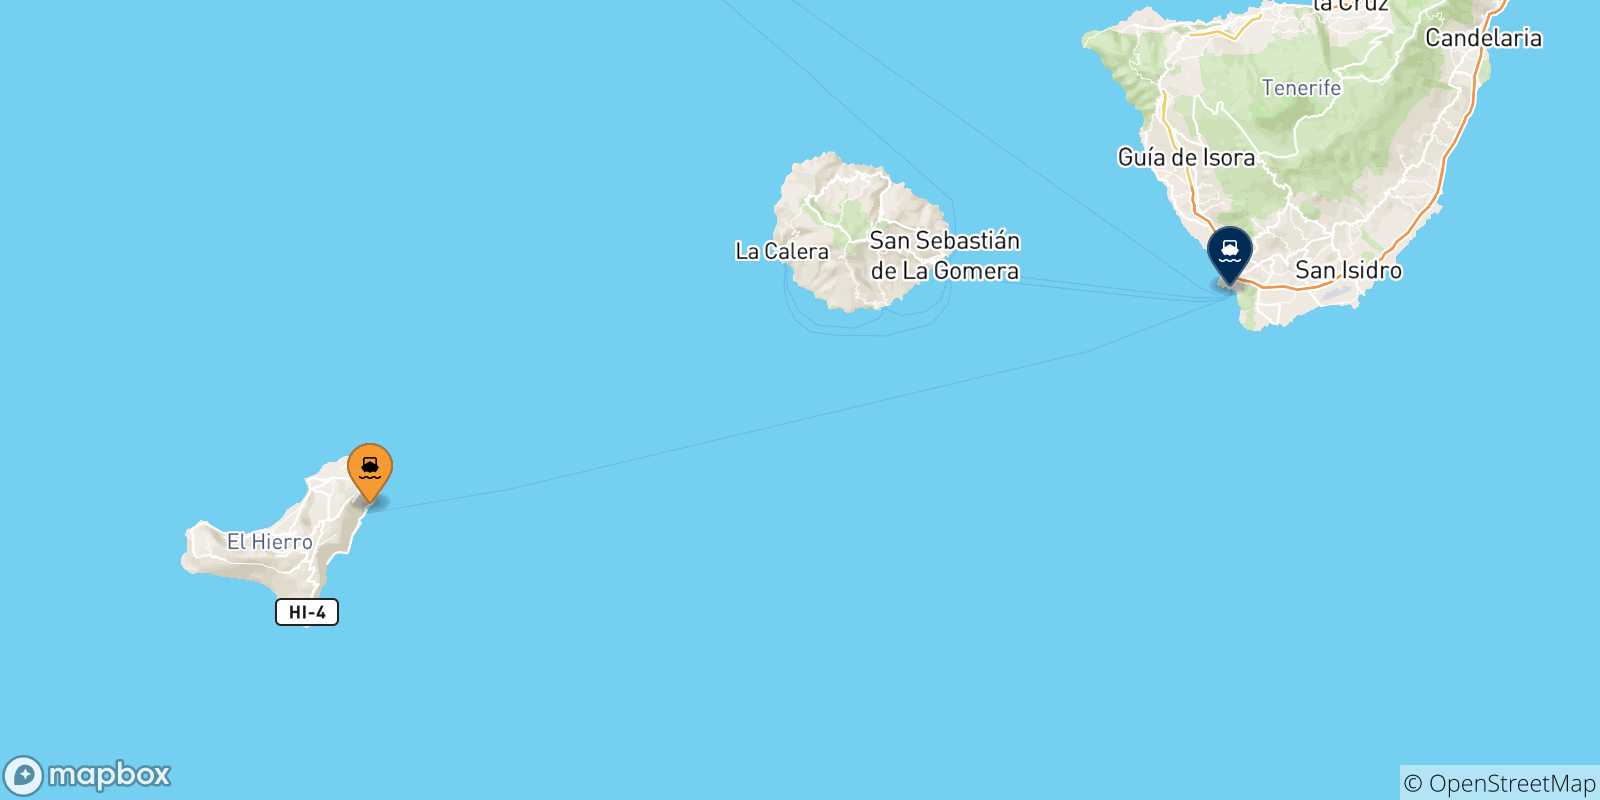 Map of the possible routes between Valverde (El Hierro) and Canary Islands